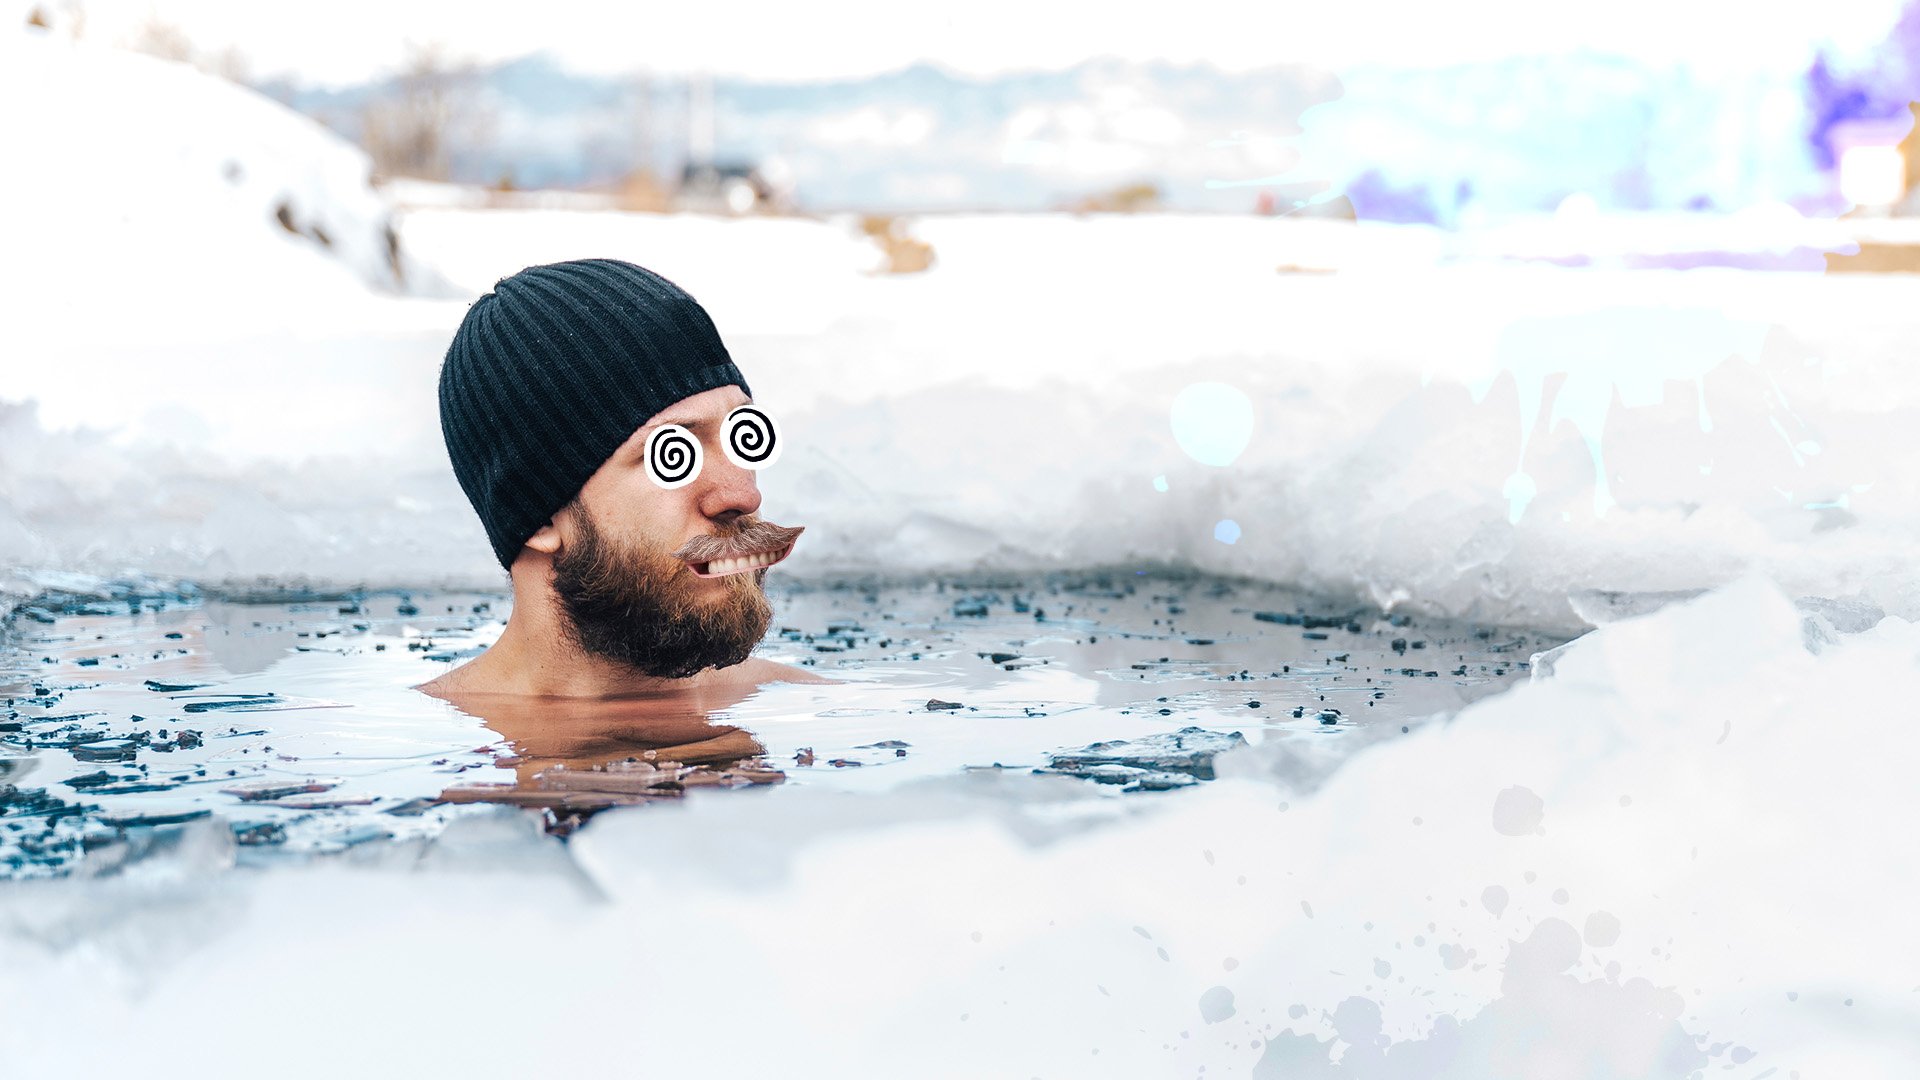 Someone swimming in icy water